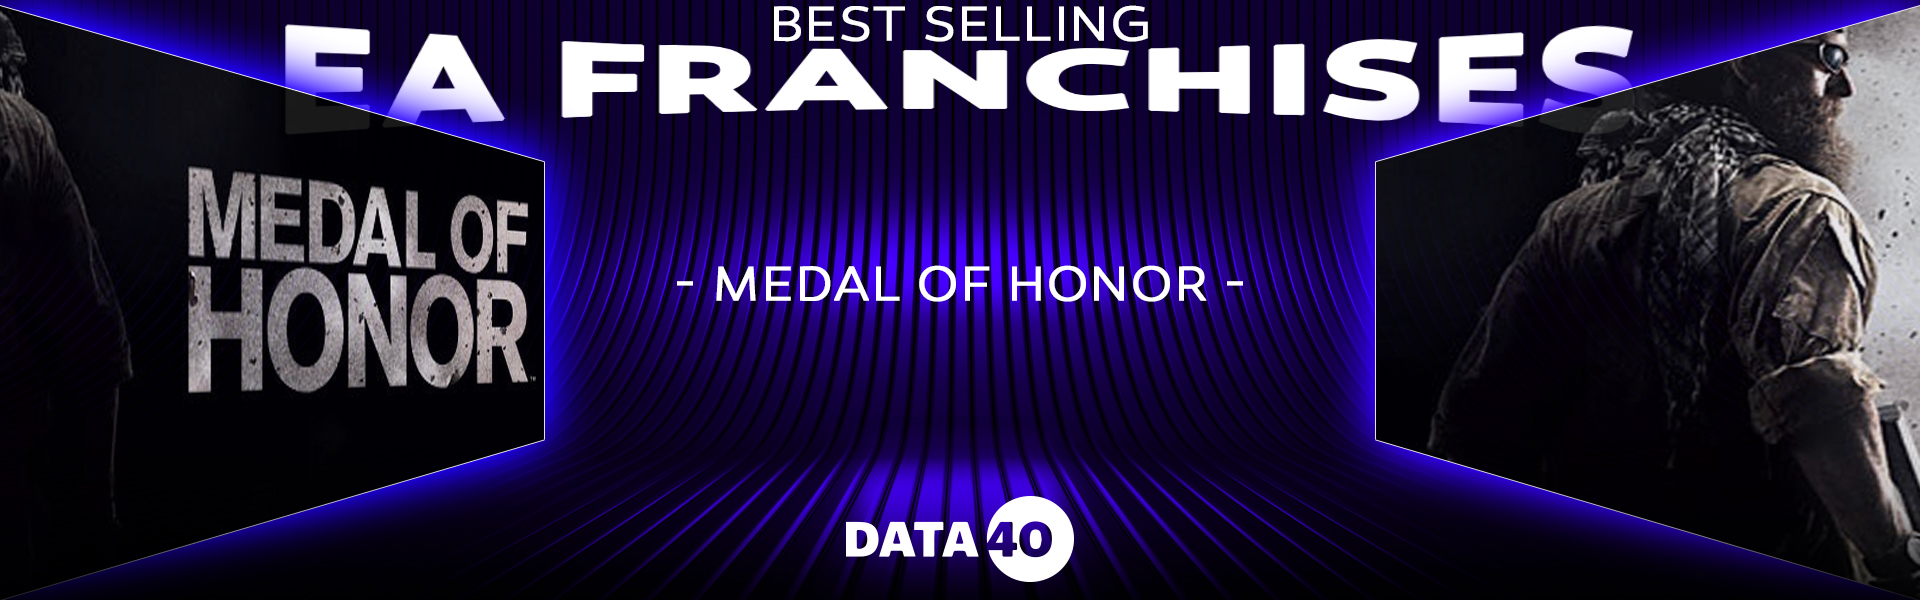 Medal of Honor
